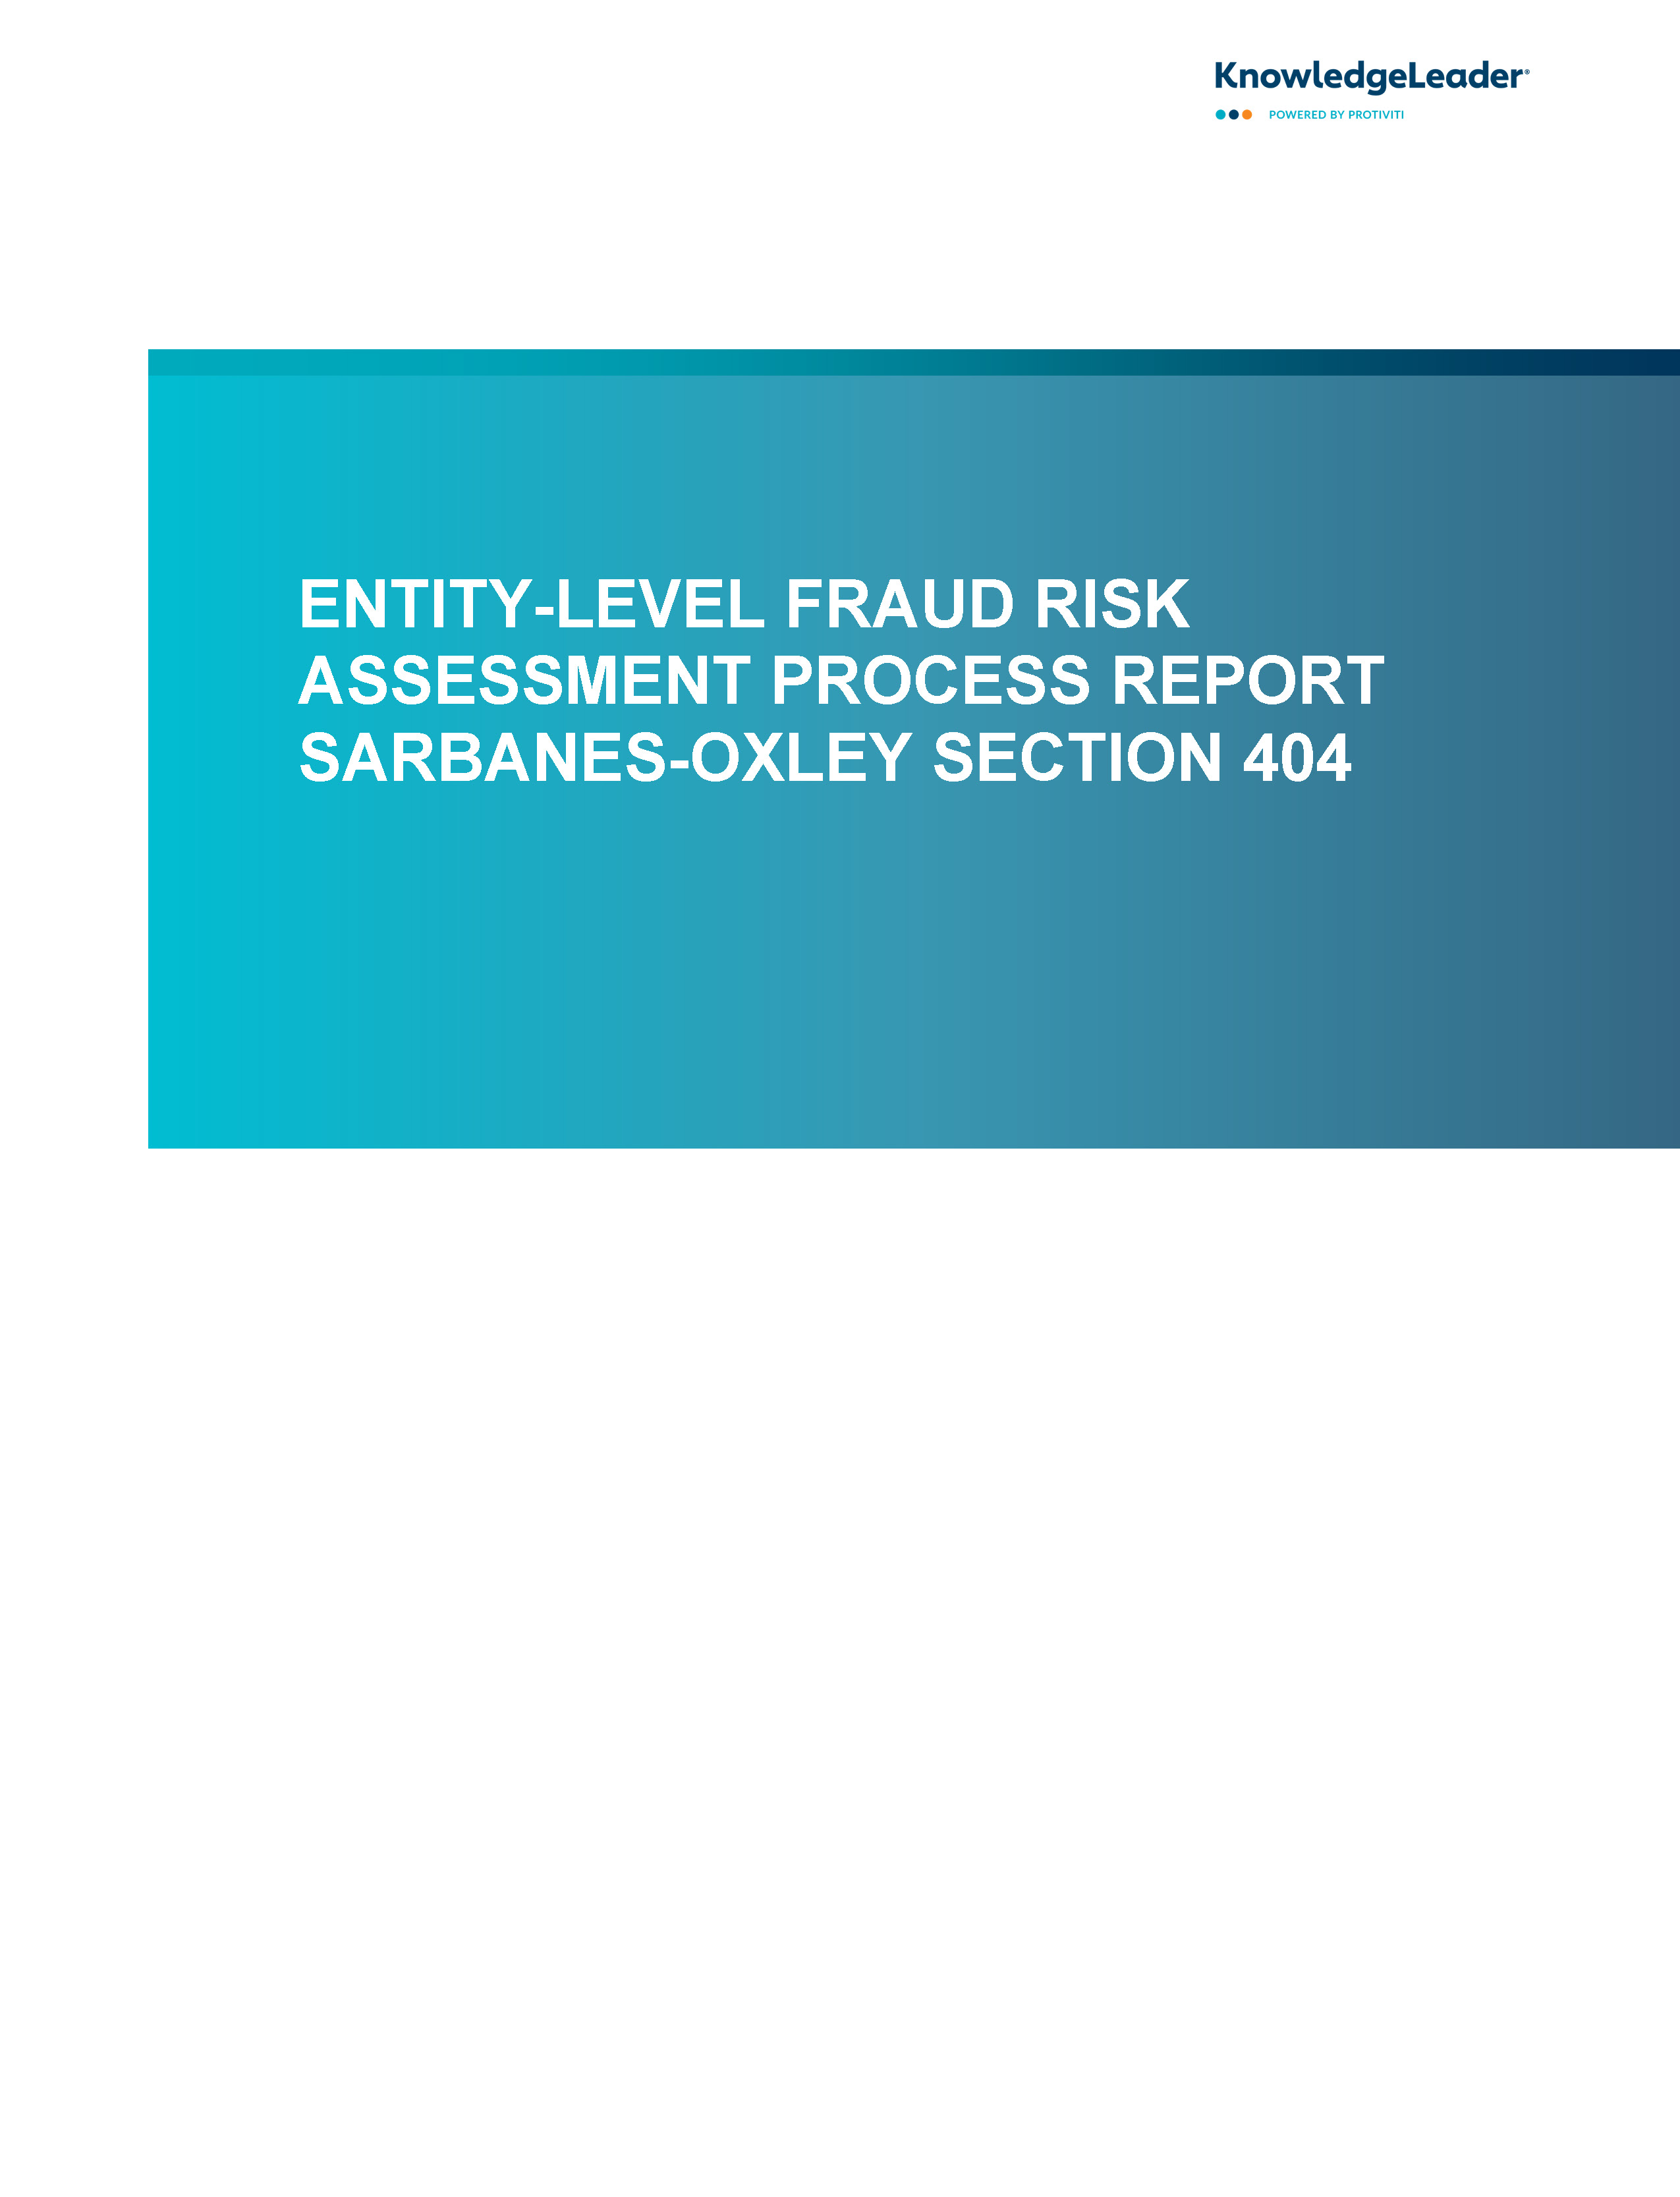 Screenshot of the first page of Entity-Level Fraud Risk Assessment Process Report